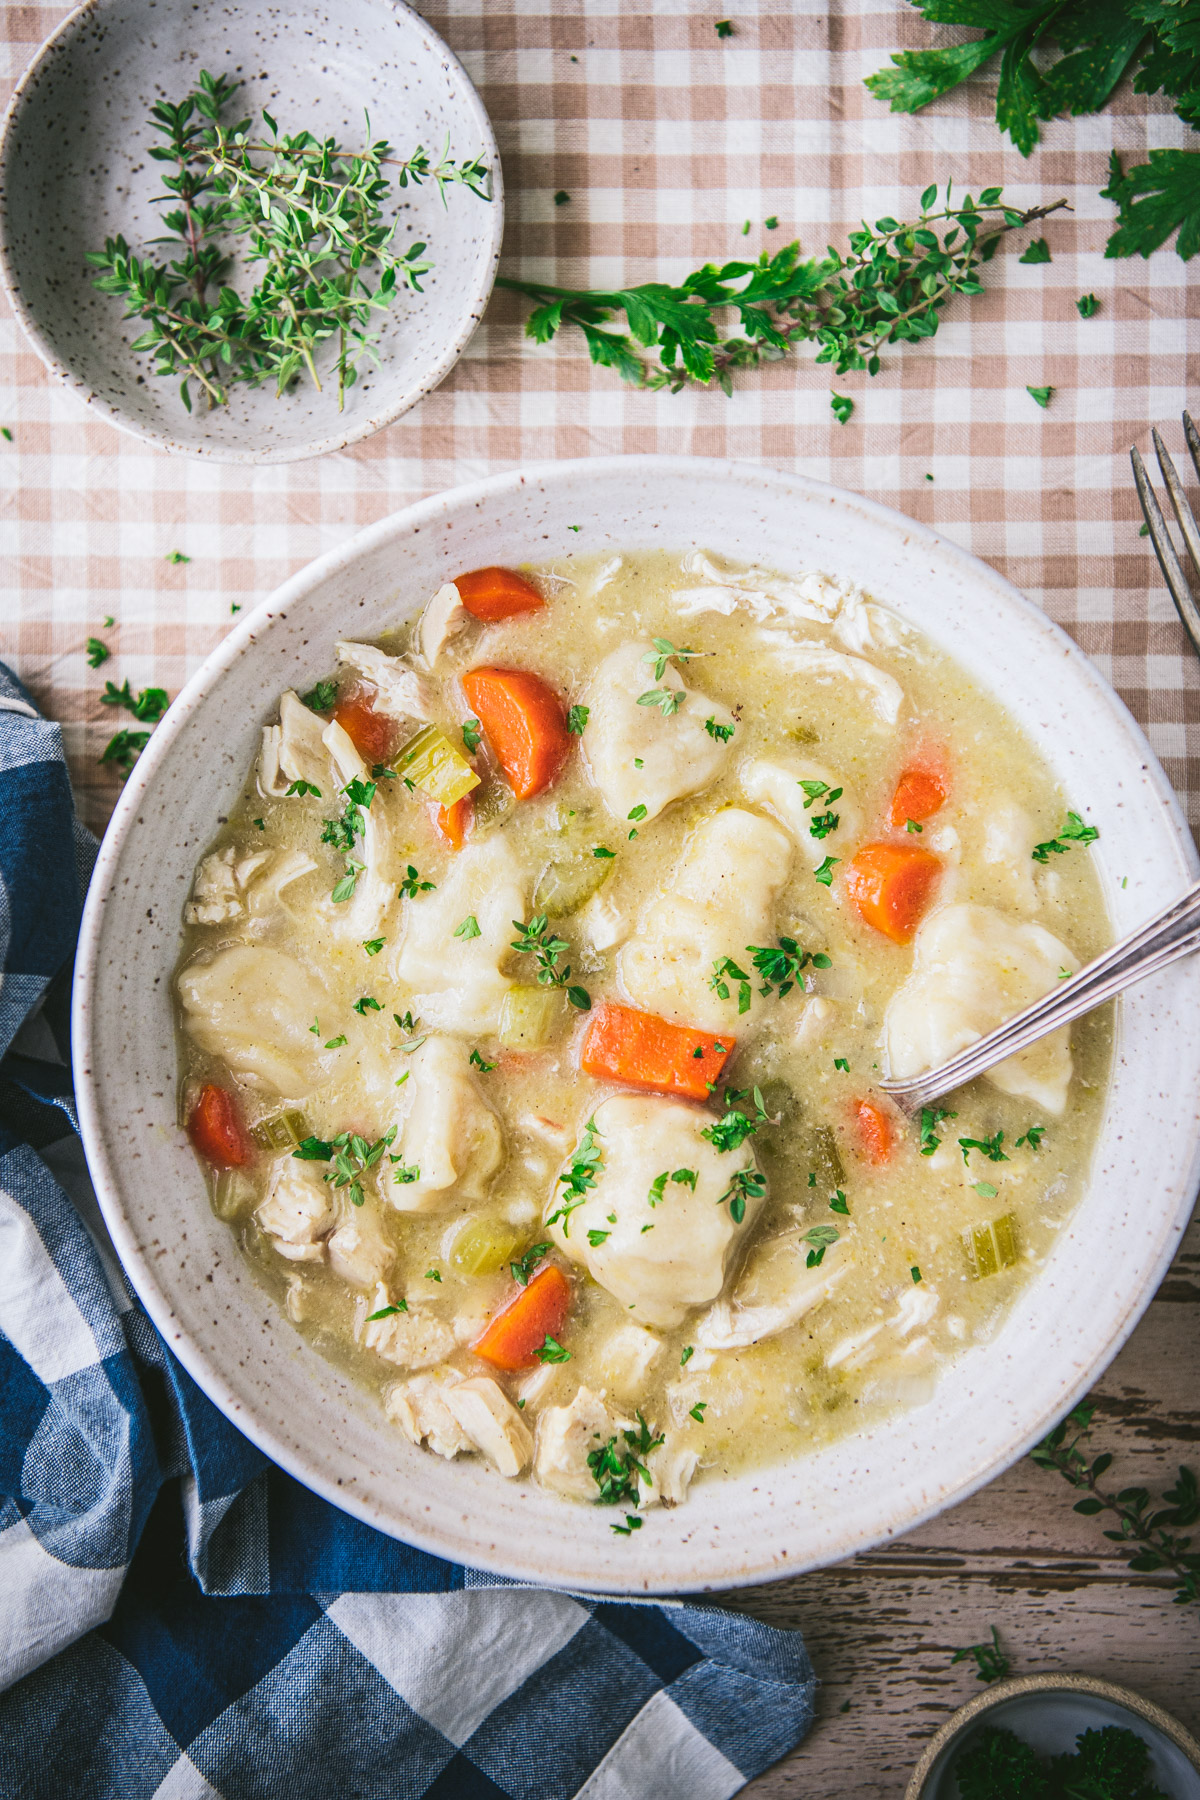 An overhead image of a hearty bowl of chicken and dumplings, served on a tablescape with fresh herbs scattered around.